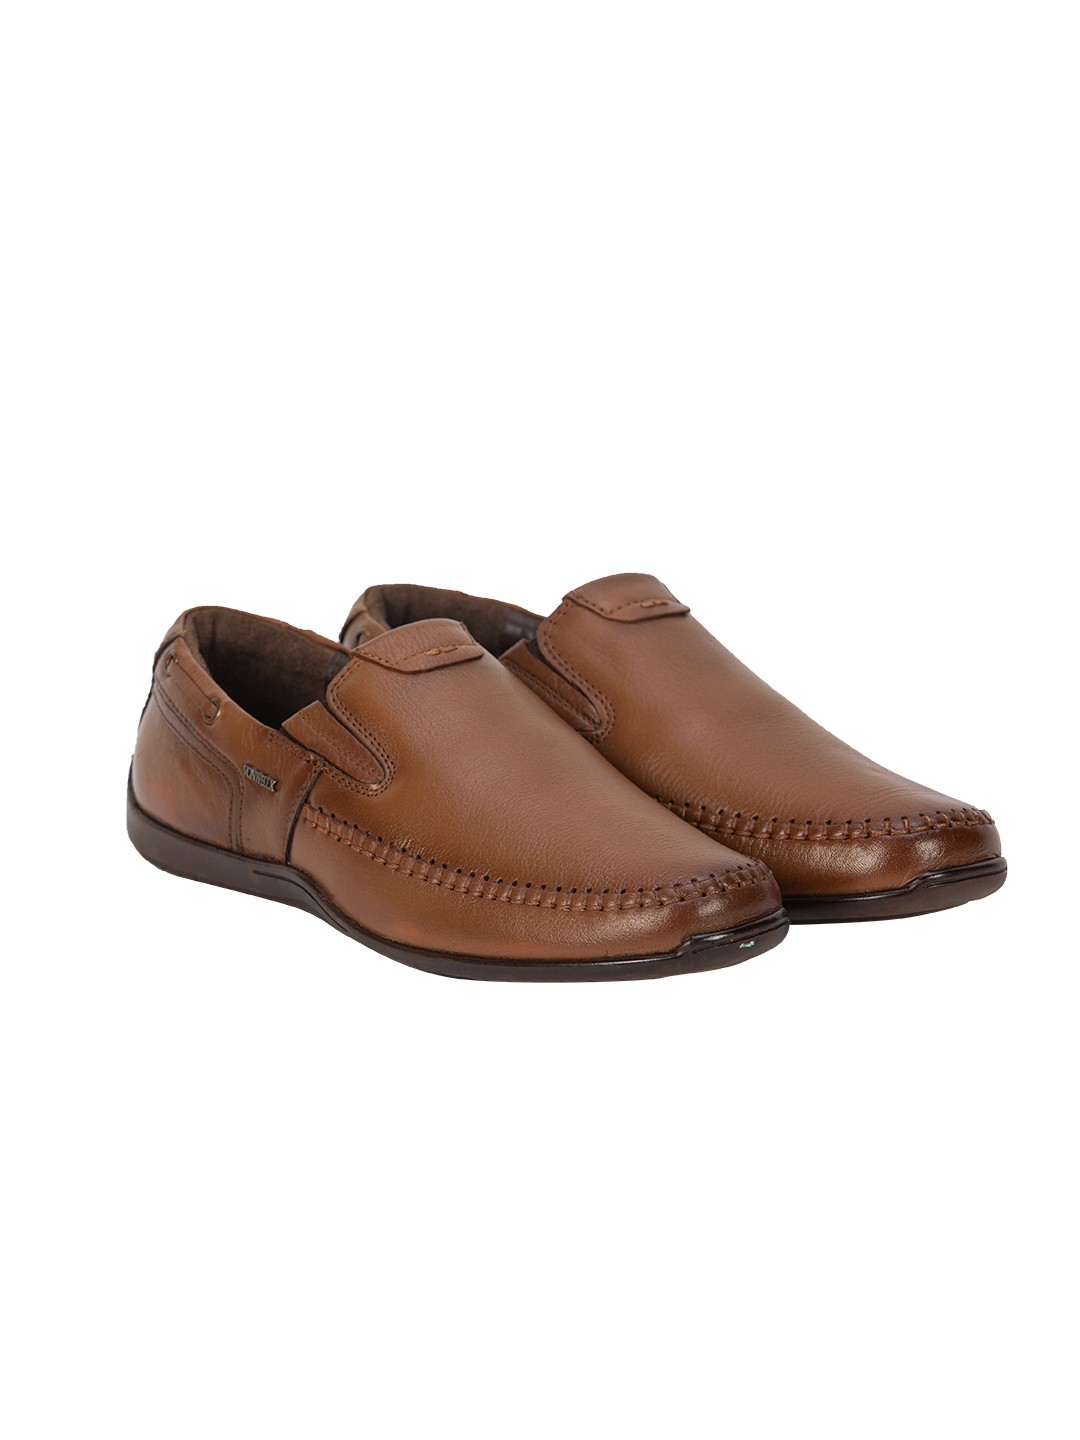 Buy Von Wellx Axel Casual Tan Shoes Online in Ludhiana